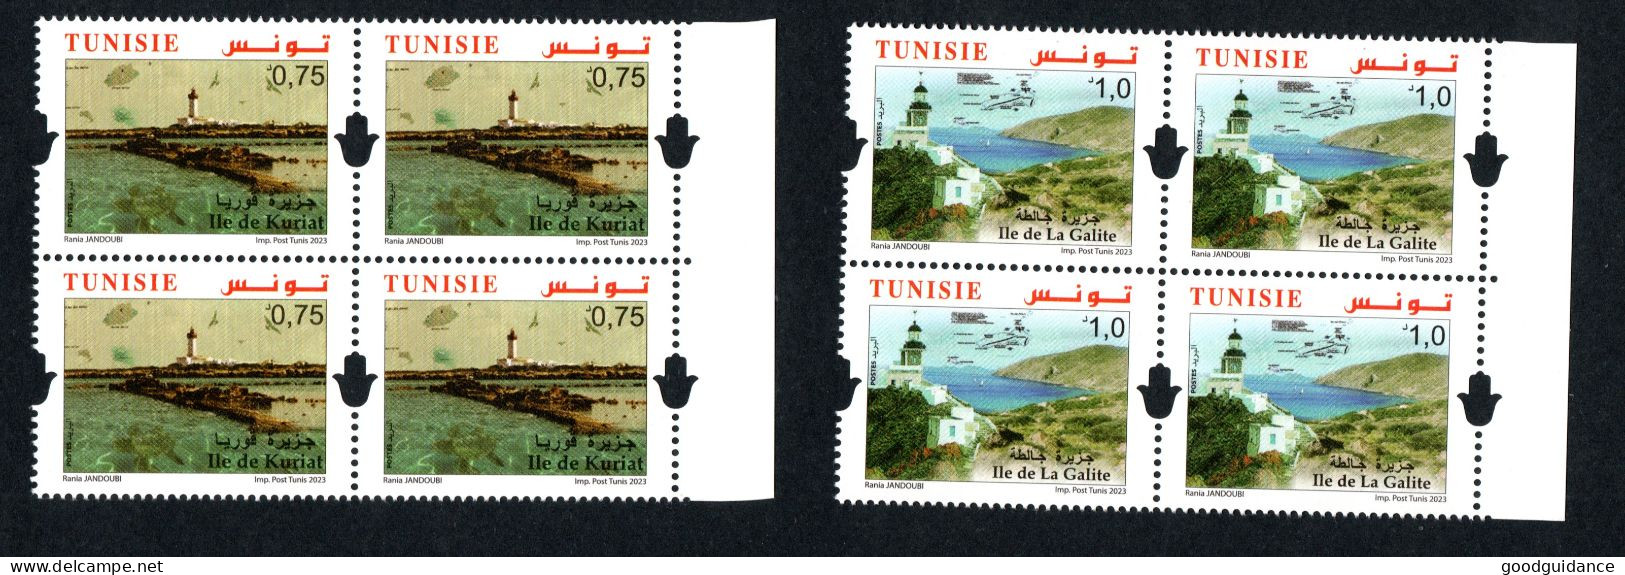 2023- Tunisia - Islands : Kuriat - Galite - Lighthouses - Sea Turtle -  Block Of 4 Stamps - Complete Set 2v.MNH** - Inseln